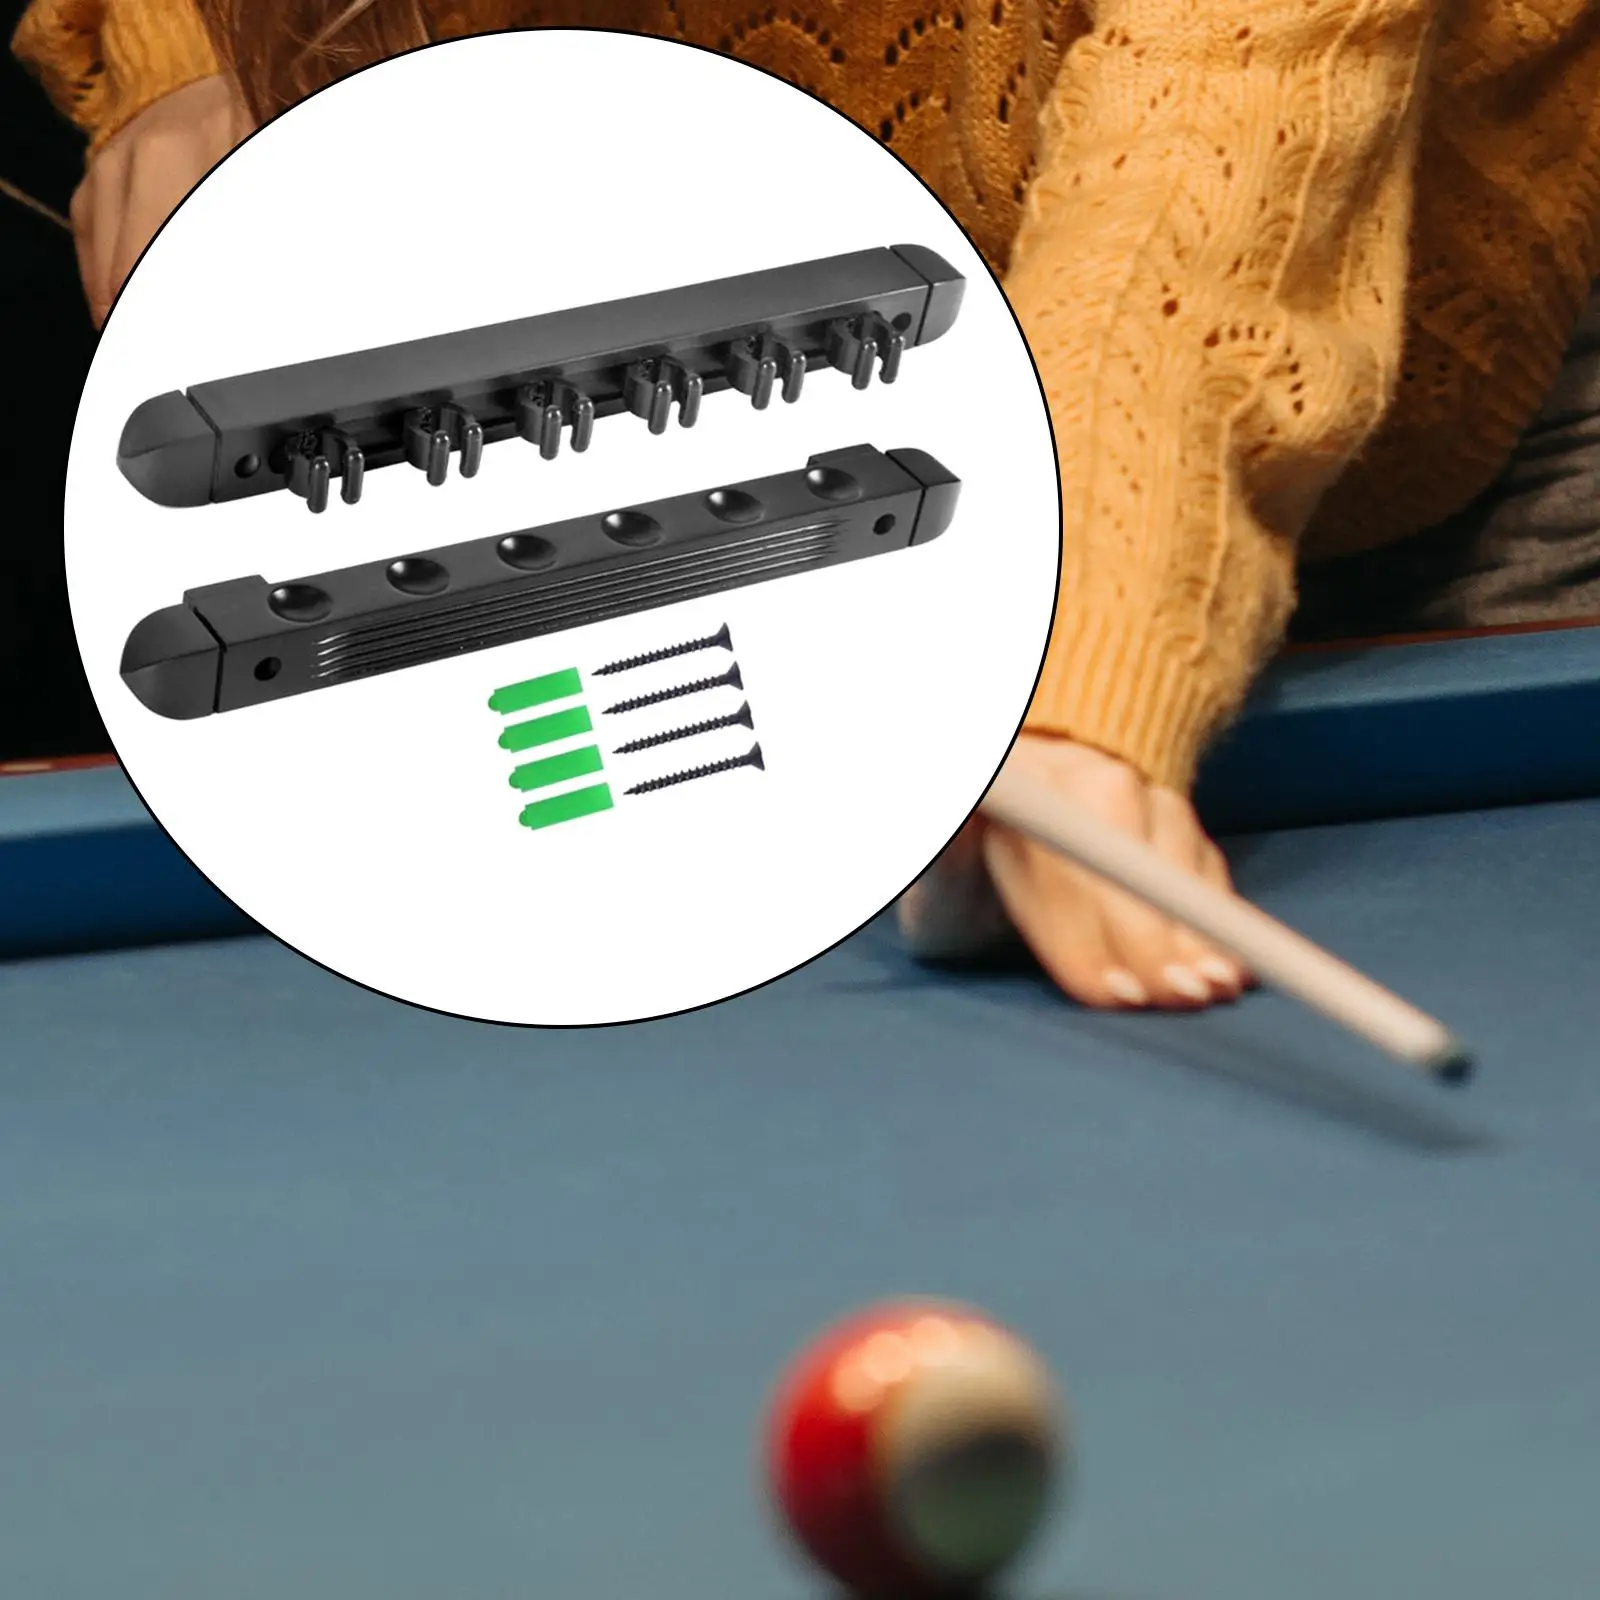 

6 Pool Billiard Cue Rack Pool Stick Holder Rest Cue Clips Rod Organizer Clubs Cue Rest Wall Mounted Wood for Pool Bars